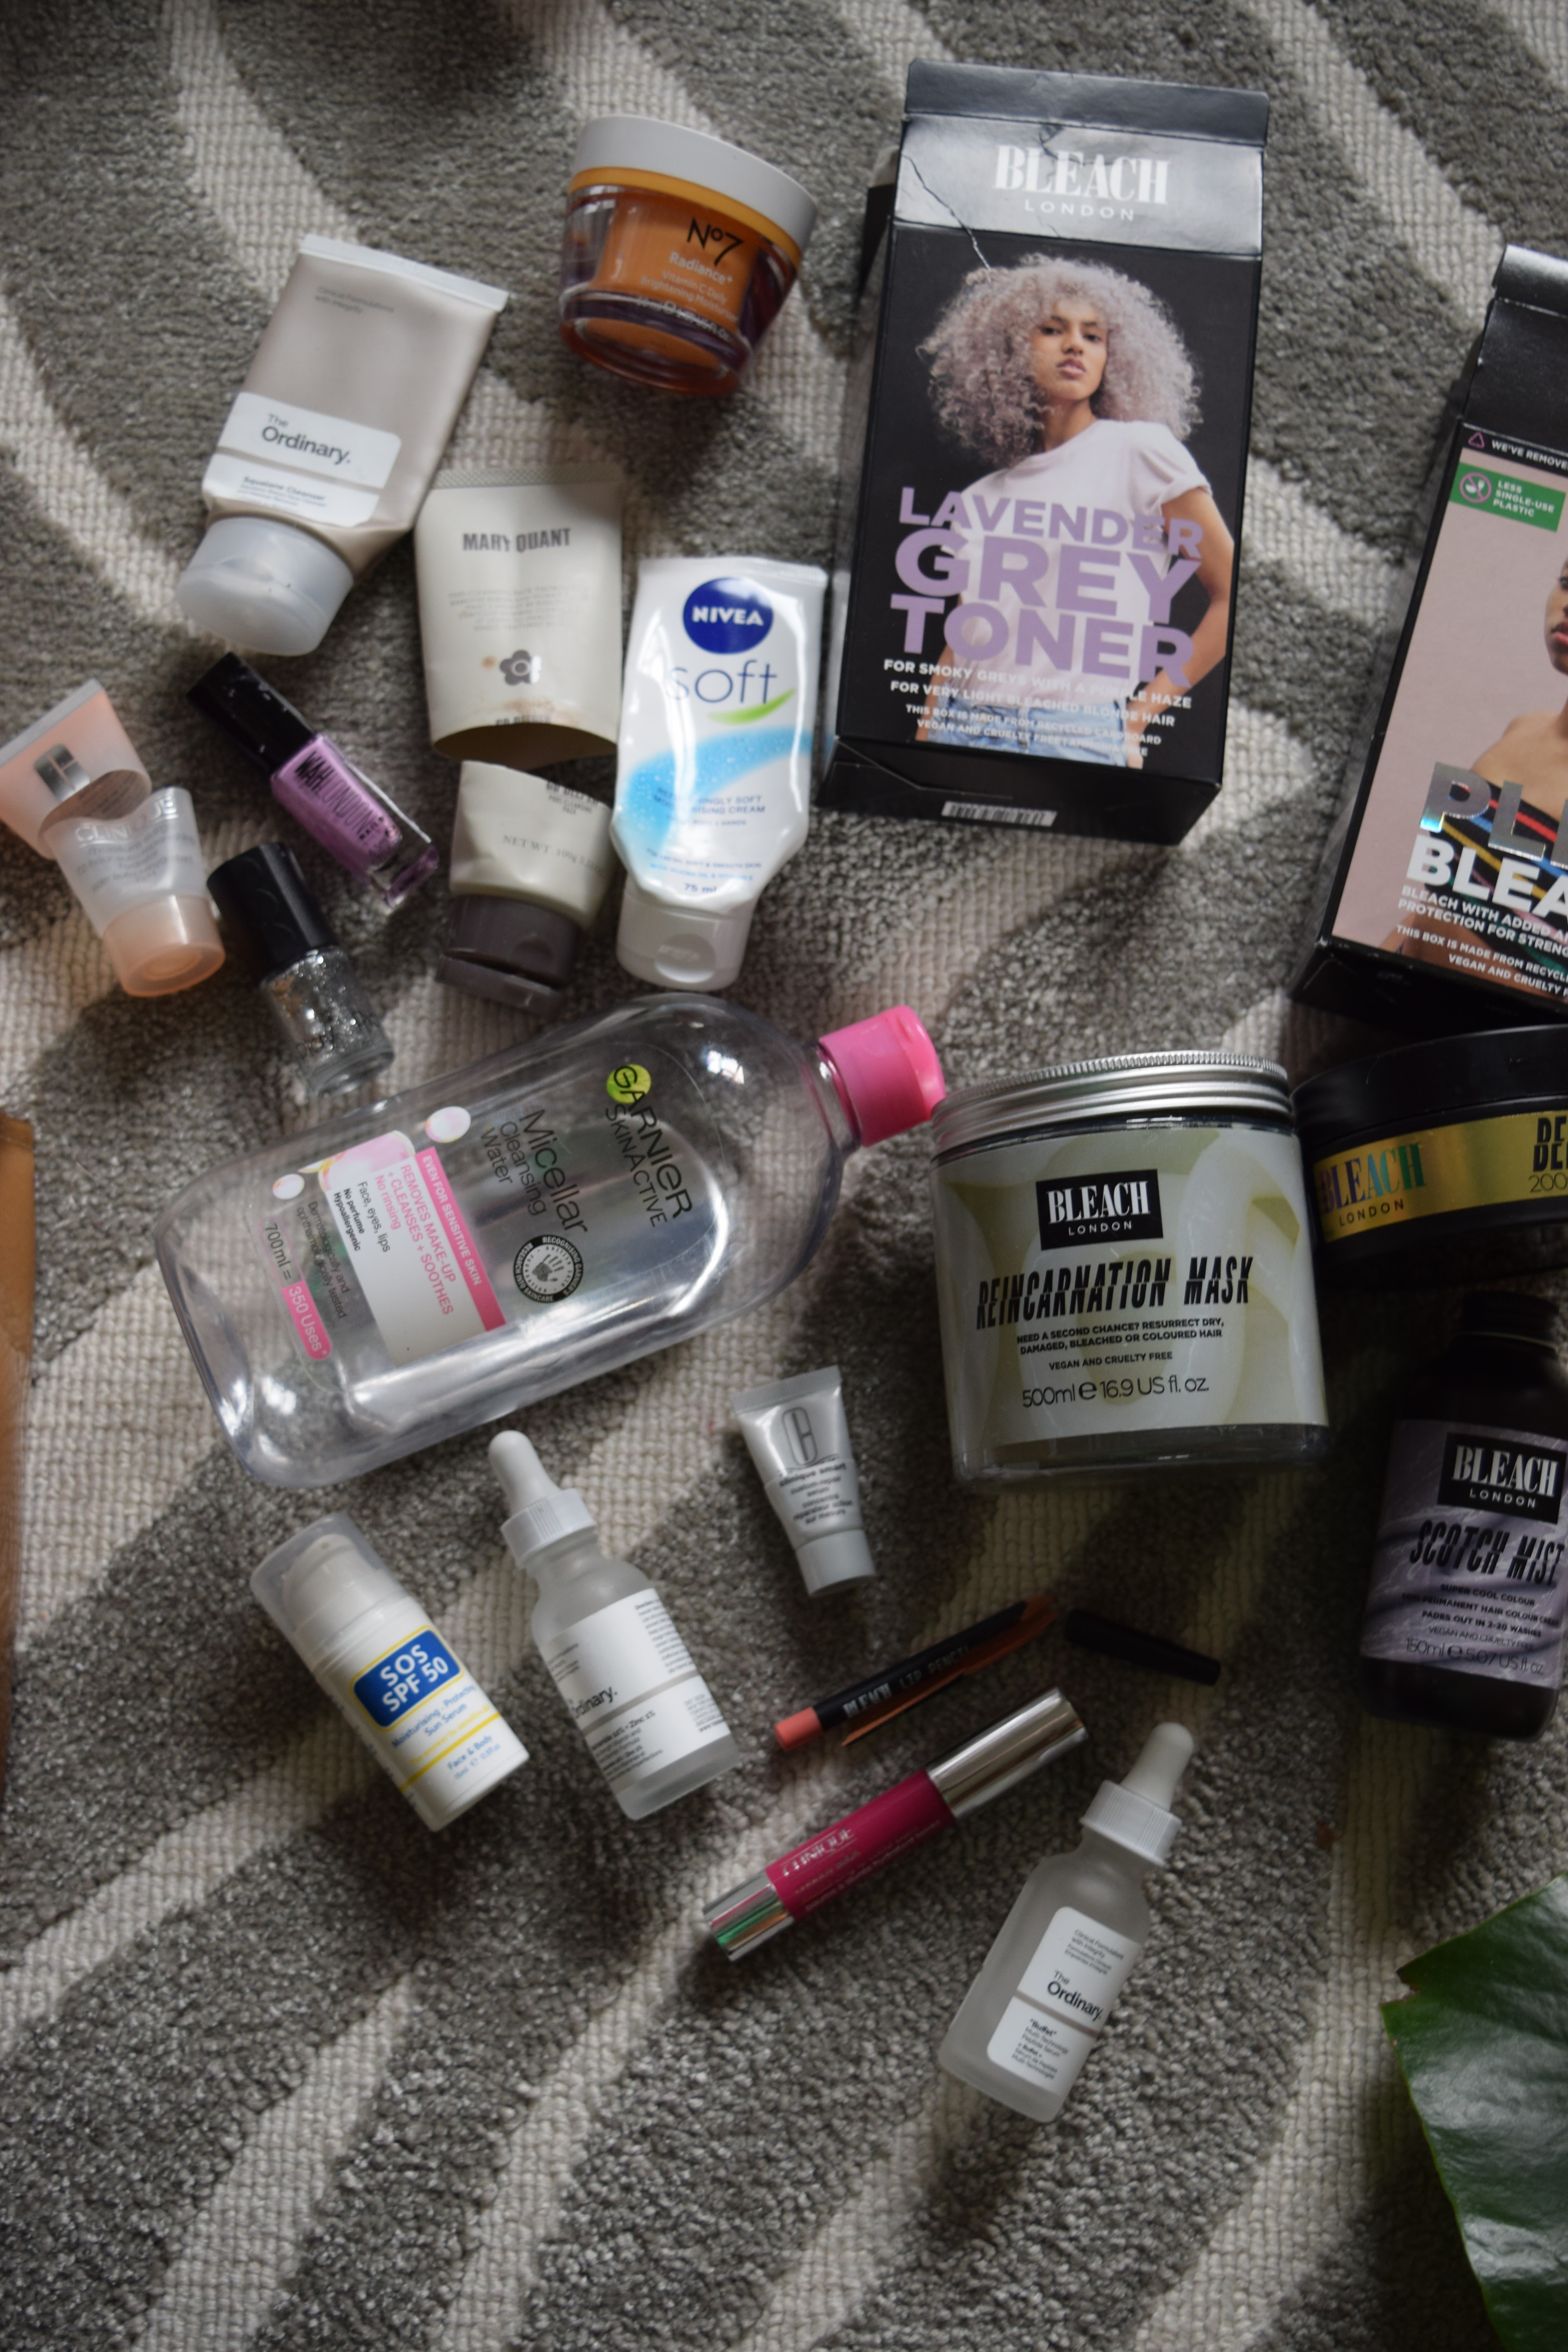 Empty beauty products on a zebra print carpet. Brands include Bleach London, The Ordinary, Mary Quant and Etude House. Some of the tubes have been cut open to get every last bit of product out.